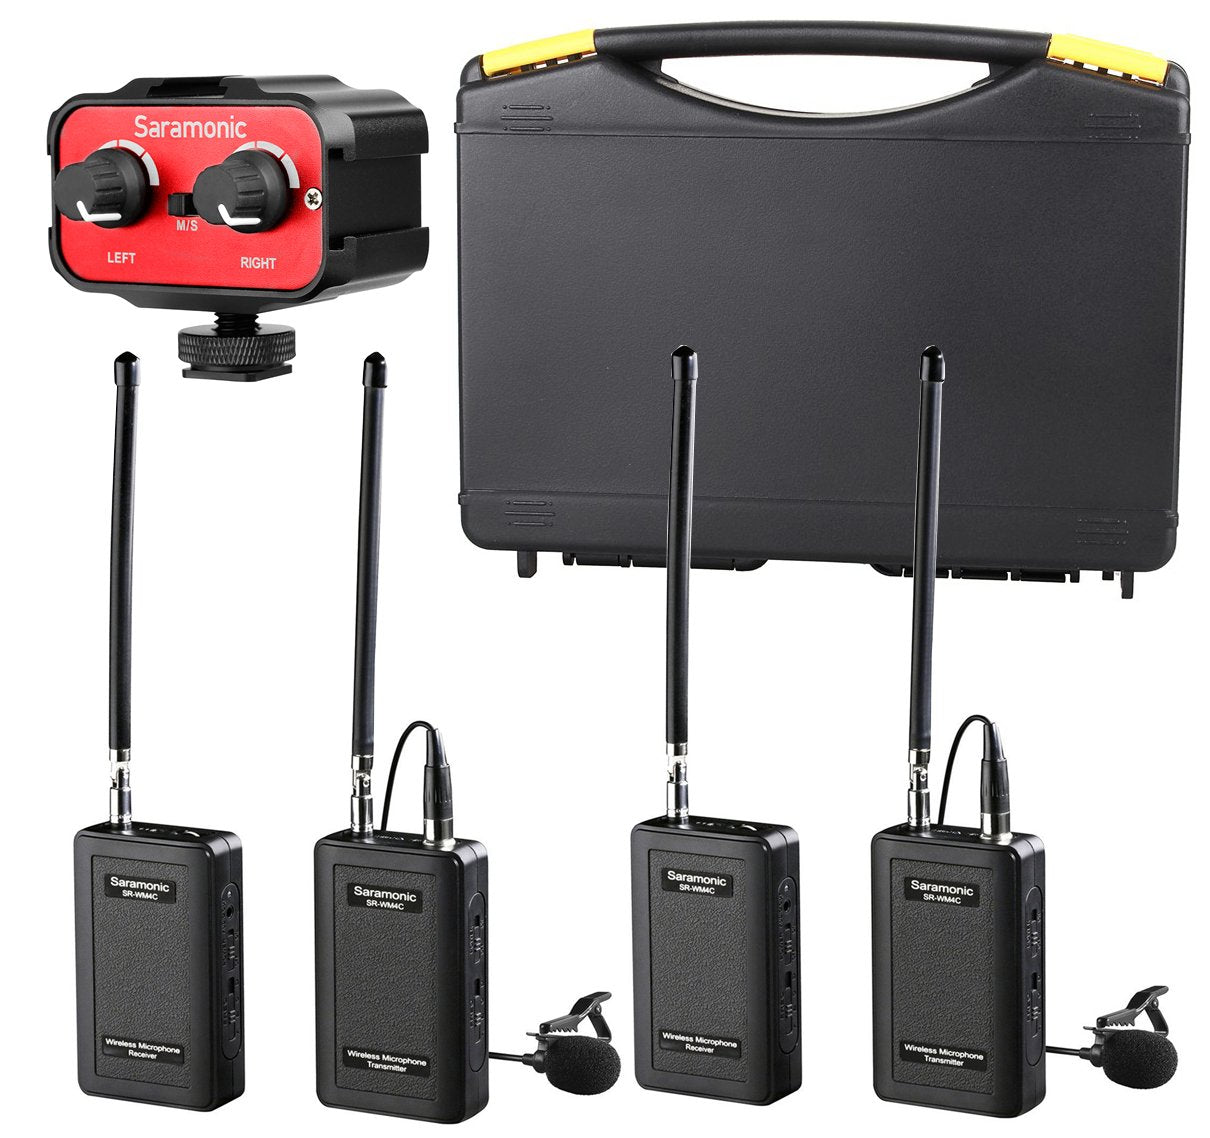 Saramonic Wireless VHF Lavalier Microphone Bundle with 2 Bodypack Transmitters, 2 Receivers, and 2-Ch Mixer for DSLR Cameras, Camcorders and More - 200' Wireless Transmission Range (Black, Red)  - Like New